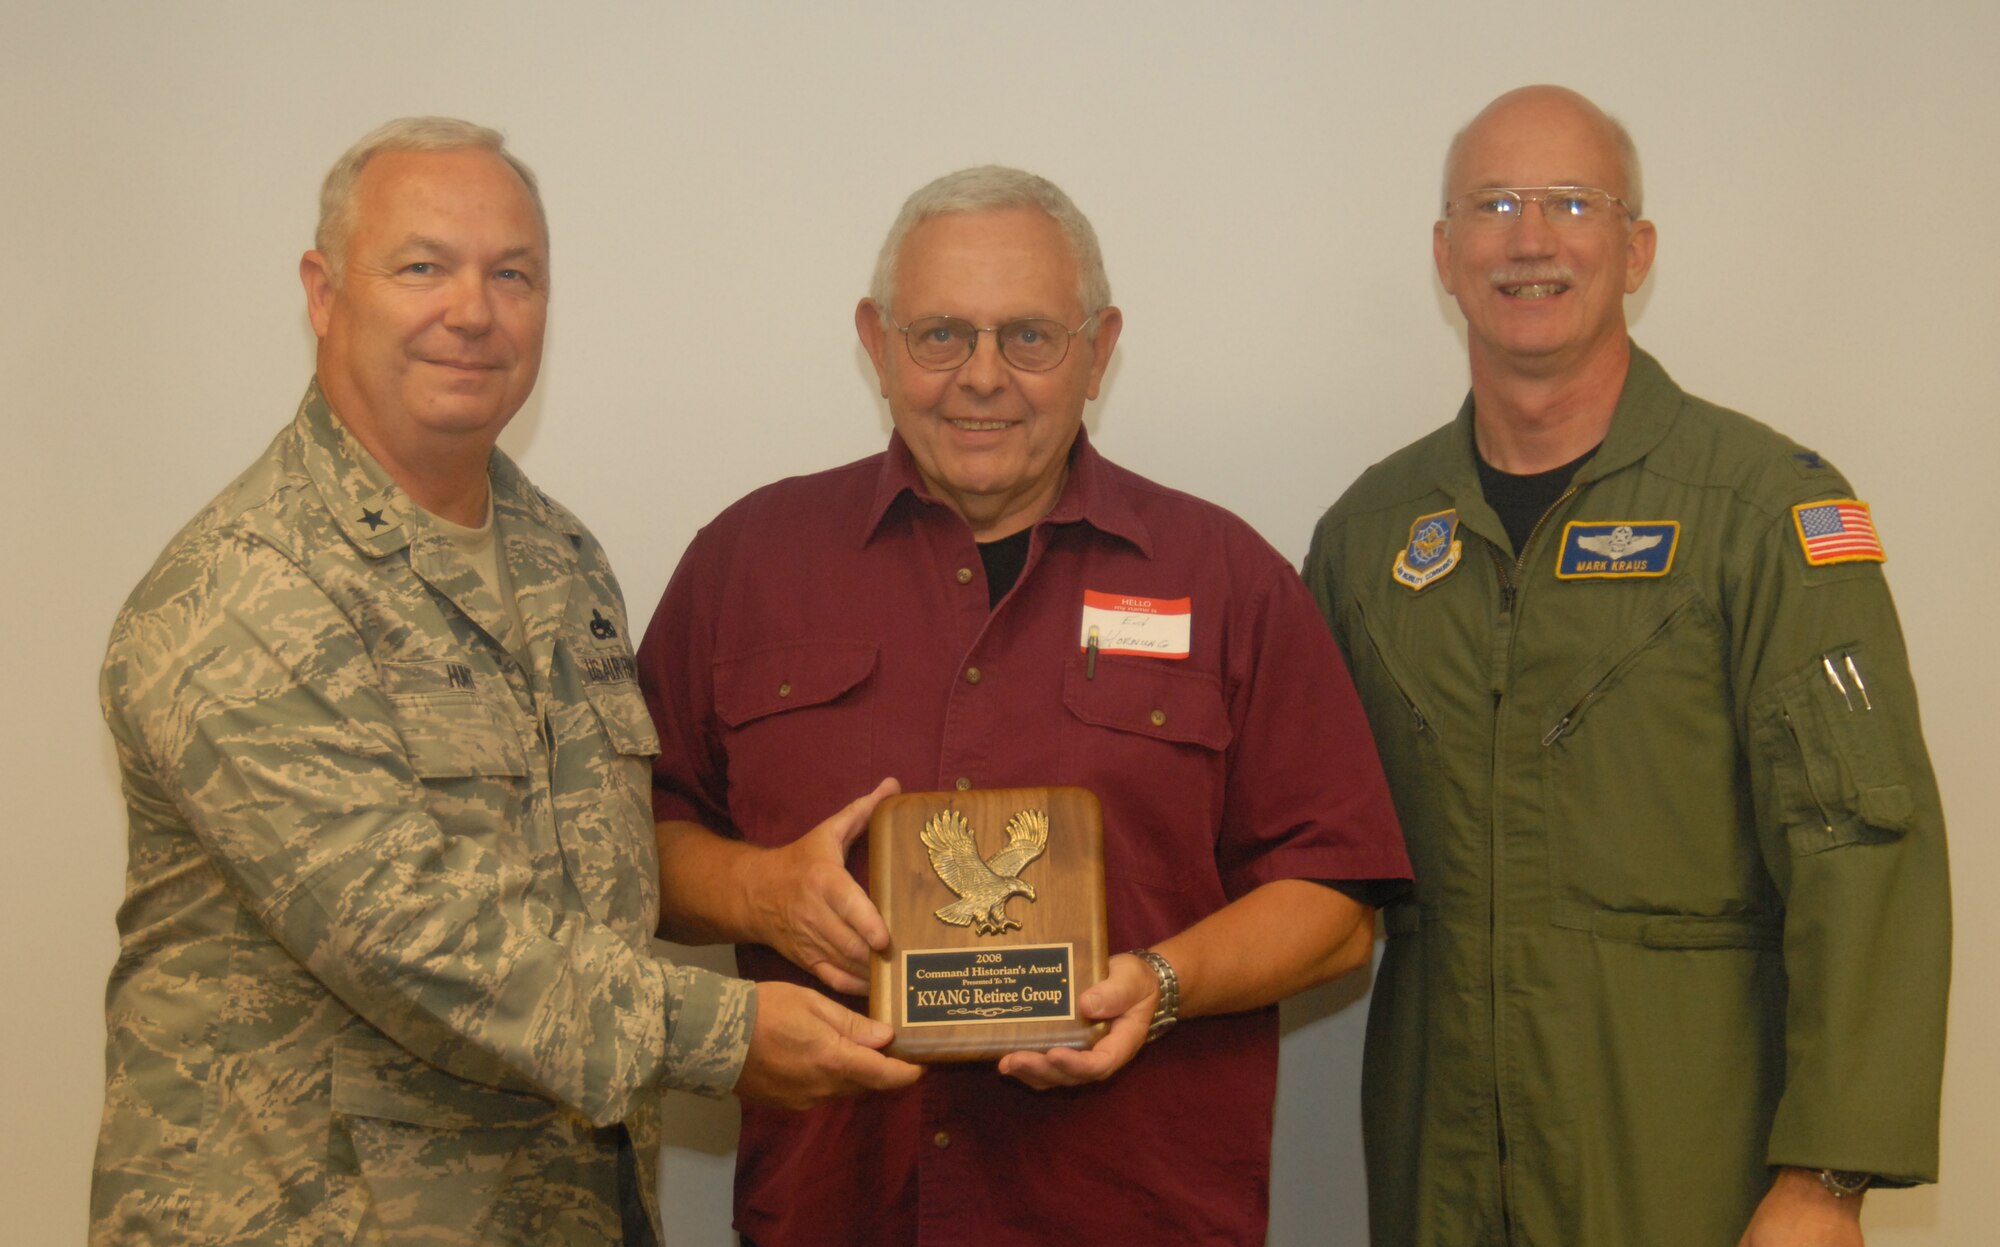 Col. (ret) Ed Hornung accepts the Historian’s plaque on behalf of the KYANG Retiree Group, presented by Brig. Gen. Howard P. Hunt, III, Kentucky Air National Guard Assistant Adjutant General, and Col. Mark R. Kraus, 123rd Airlift Wing Commander - photo by Tech. Sgt. Philip S. Speck